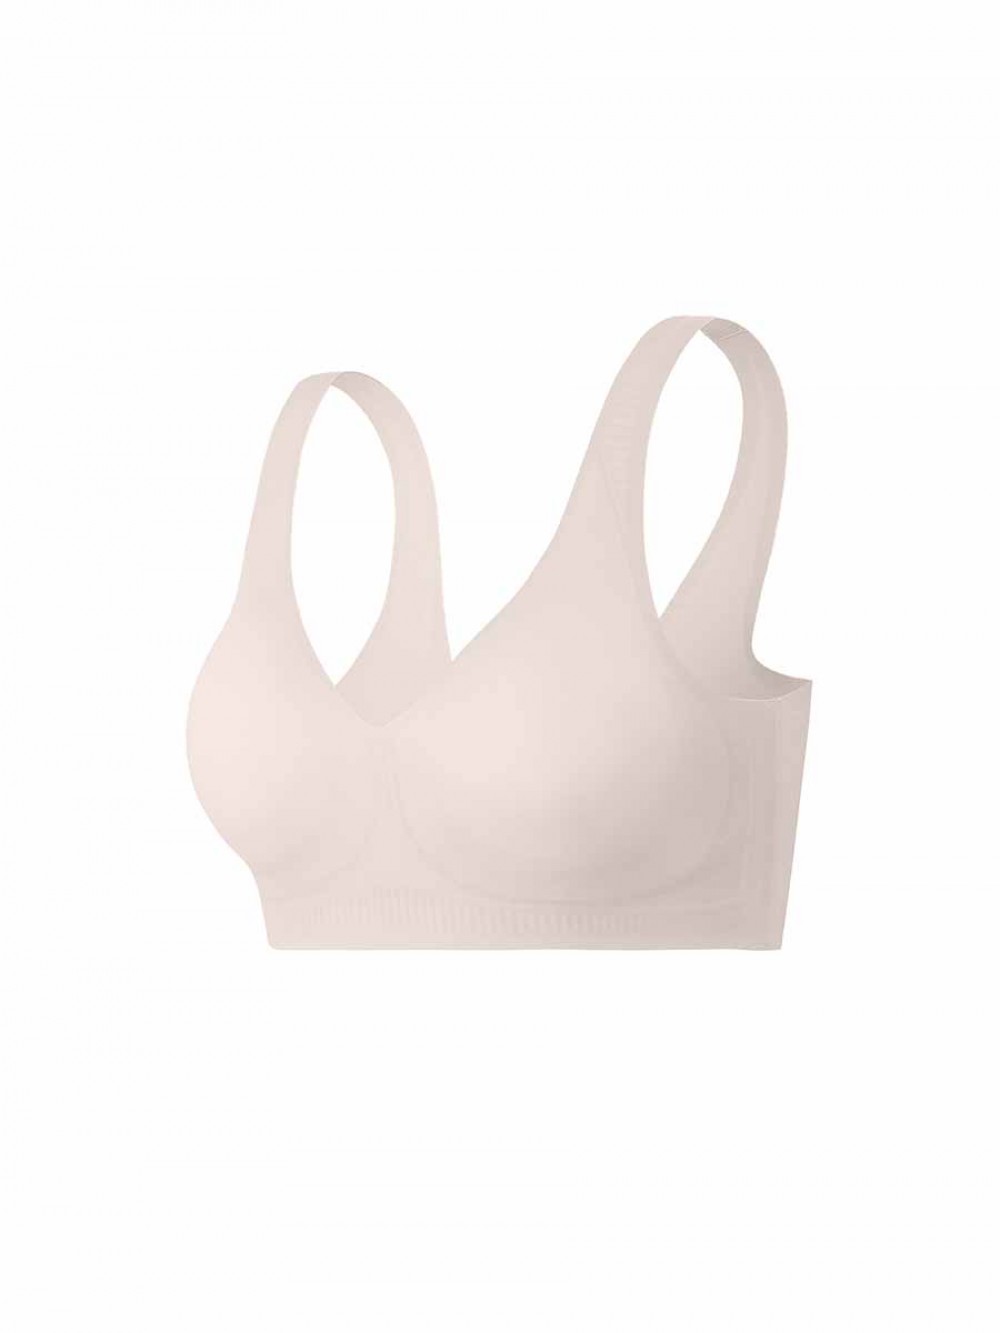 Nude Wholesale Soft High Quality Seamless Bra Soft-Touch Smoothing Fabric For Workout